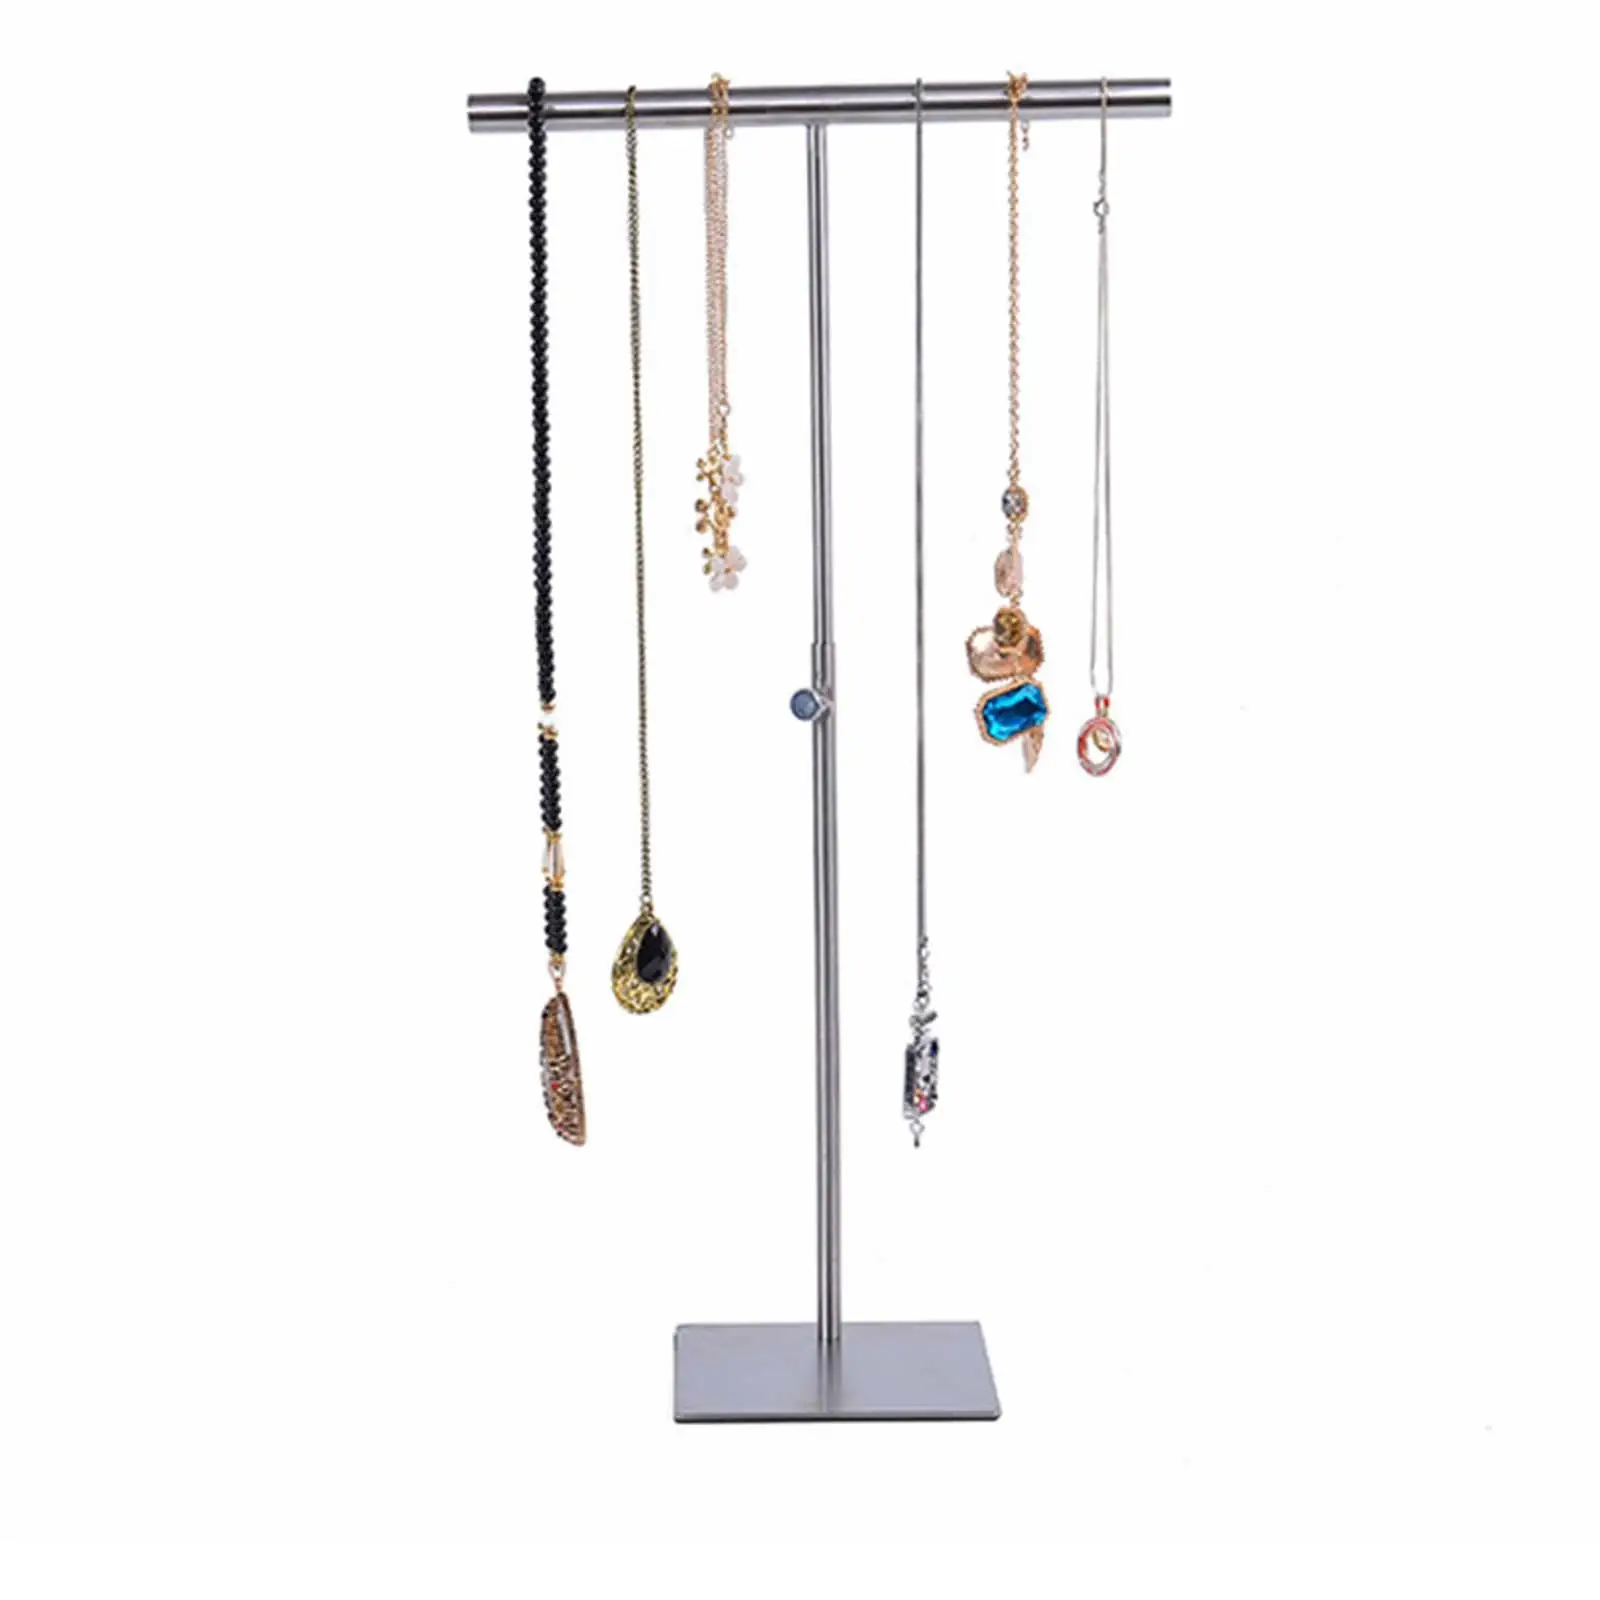 Earring Display Tower Organizer Hanging Holder Stainless Steel Shelf Storage Bar Rack for Watch Earrings Ring Necklace Bag